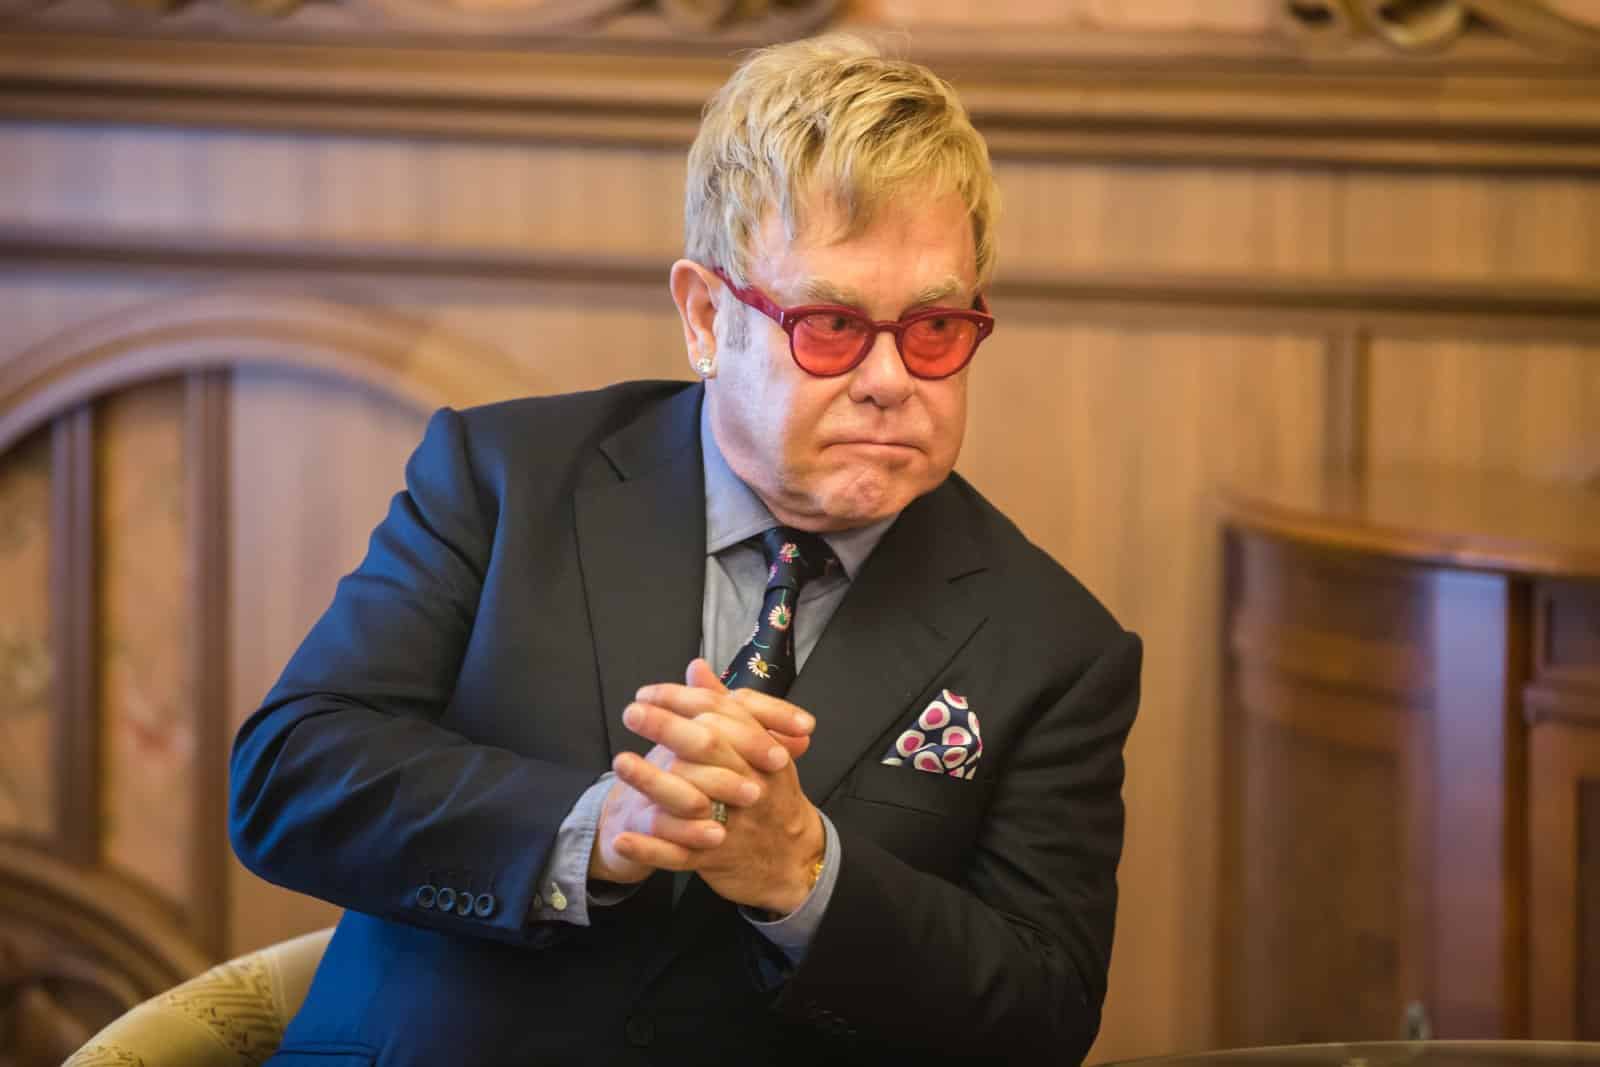 Image Credit: Shutterstock / Drop of Light <p><span>Elton John, upon receiving the Harvard Foundation’s Peter J. Gomes Humanitarian Award in 2017, spoke extensively about the challenges and advancements in the fight against HIV/AIDS, particularly in the LGBTQ+ community.</span></p>